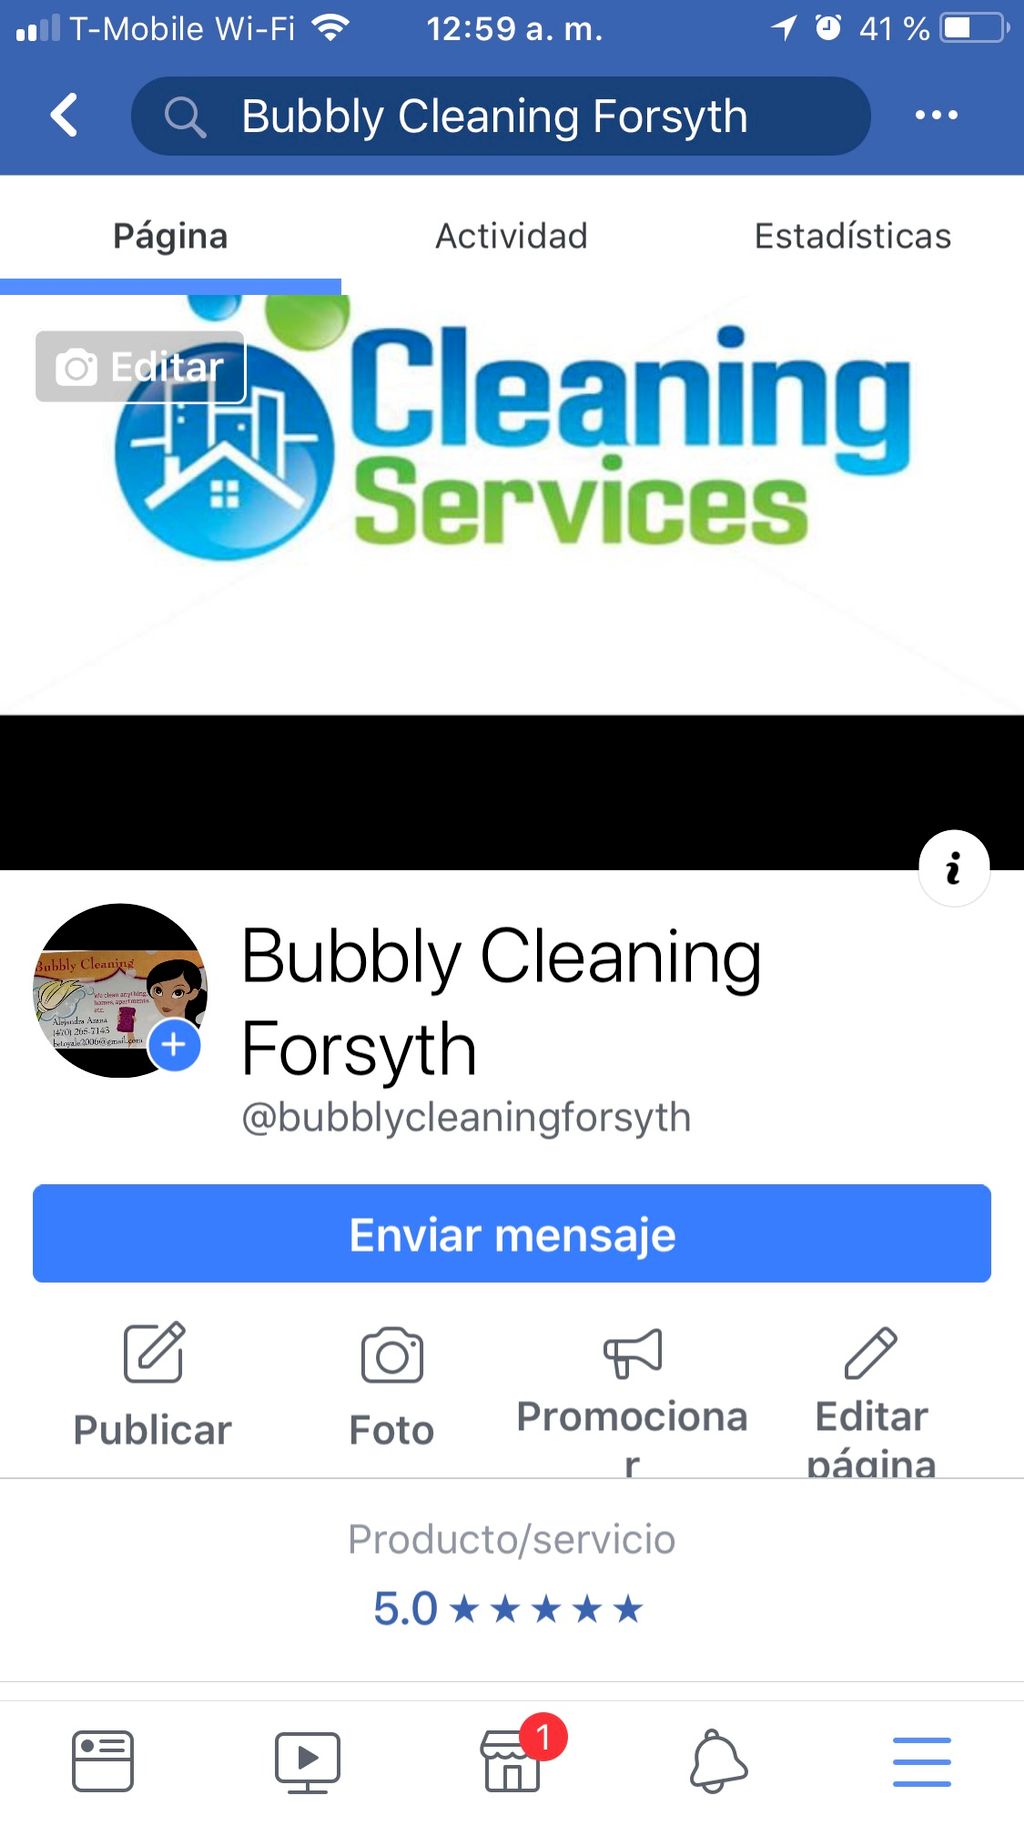 Bubbly Cleaning Forsyth